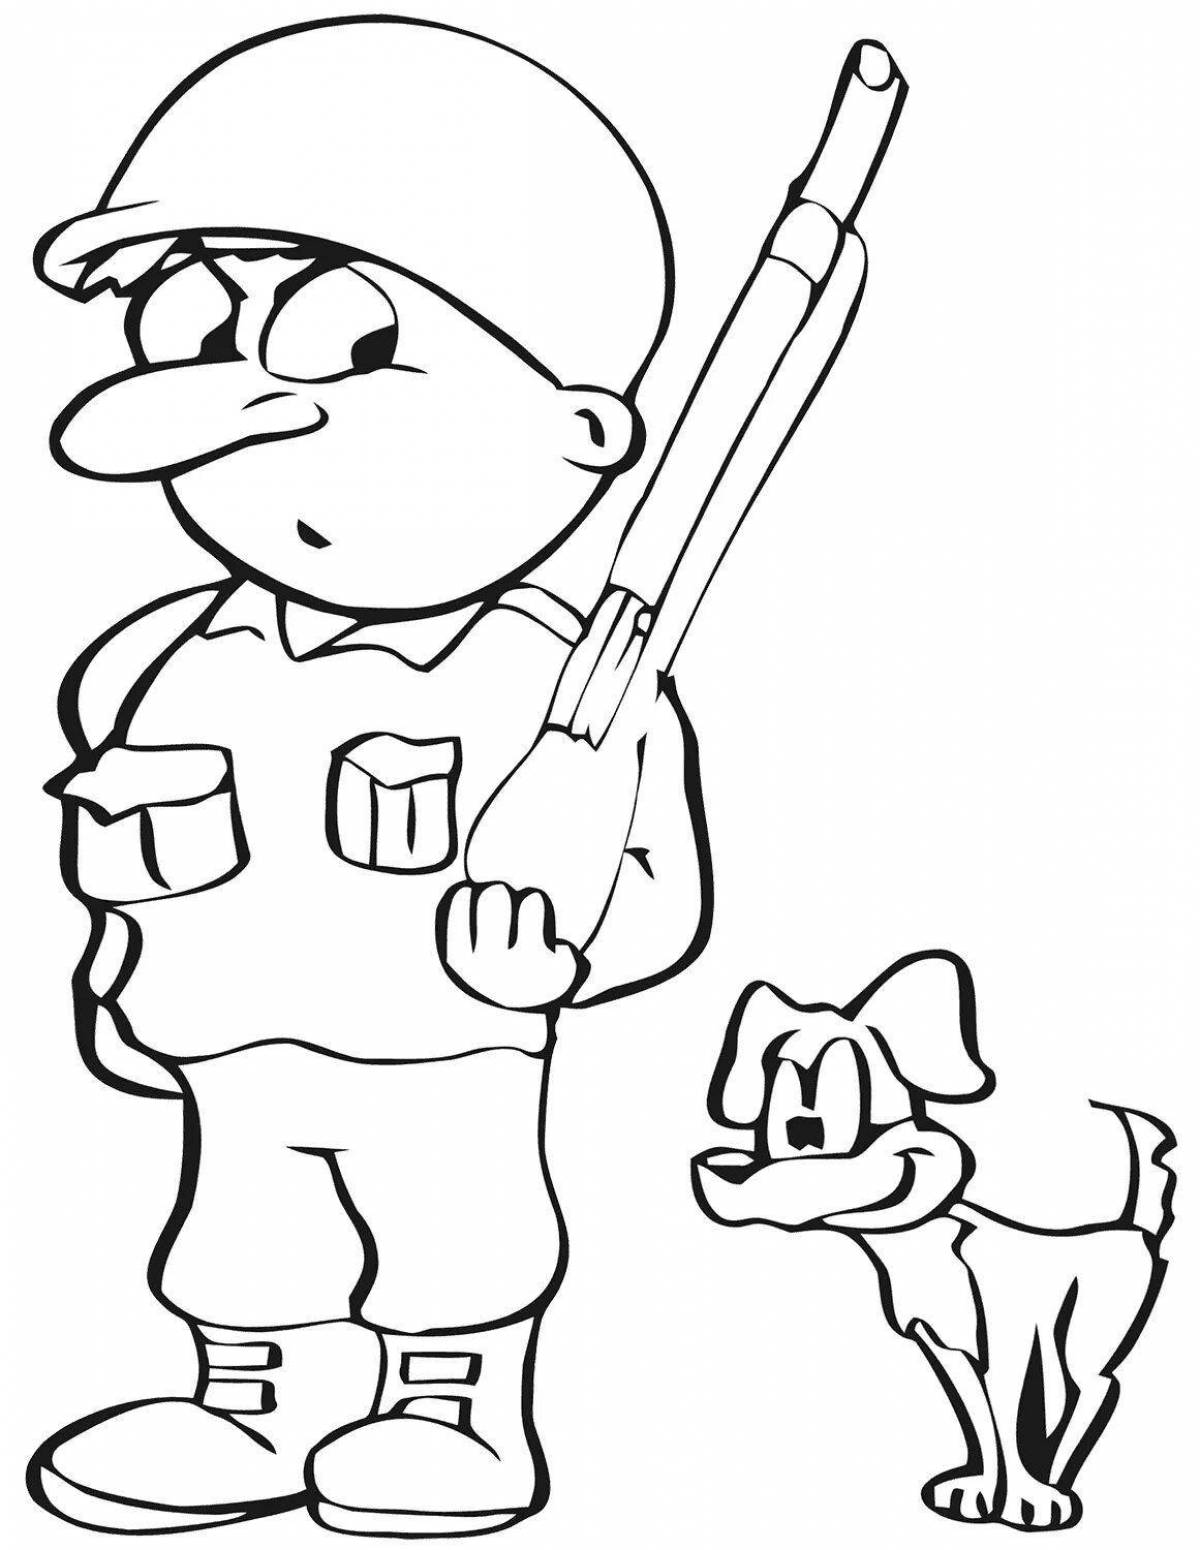 Exquisite soldier coloring page